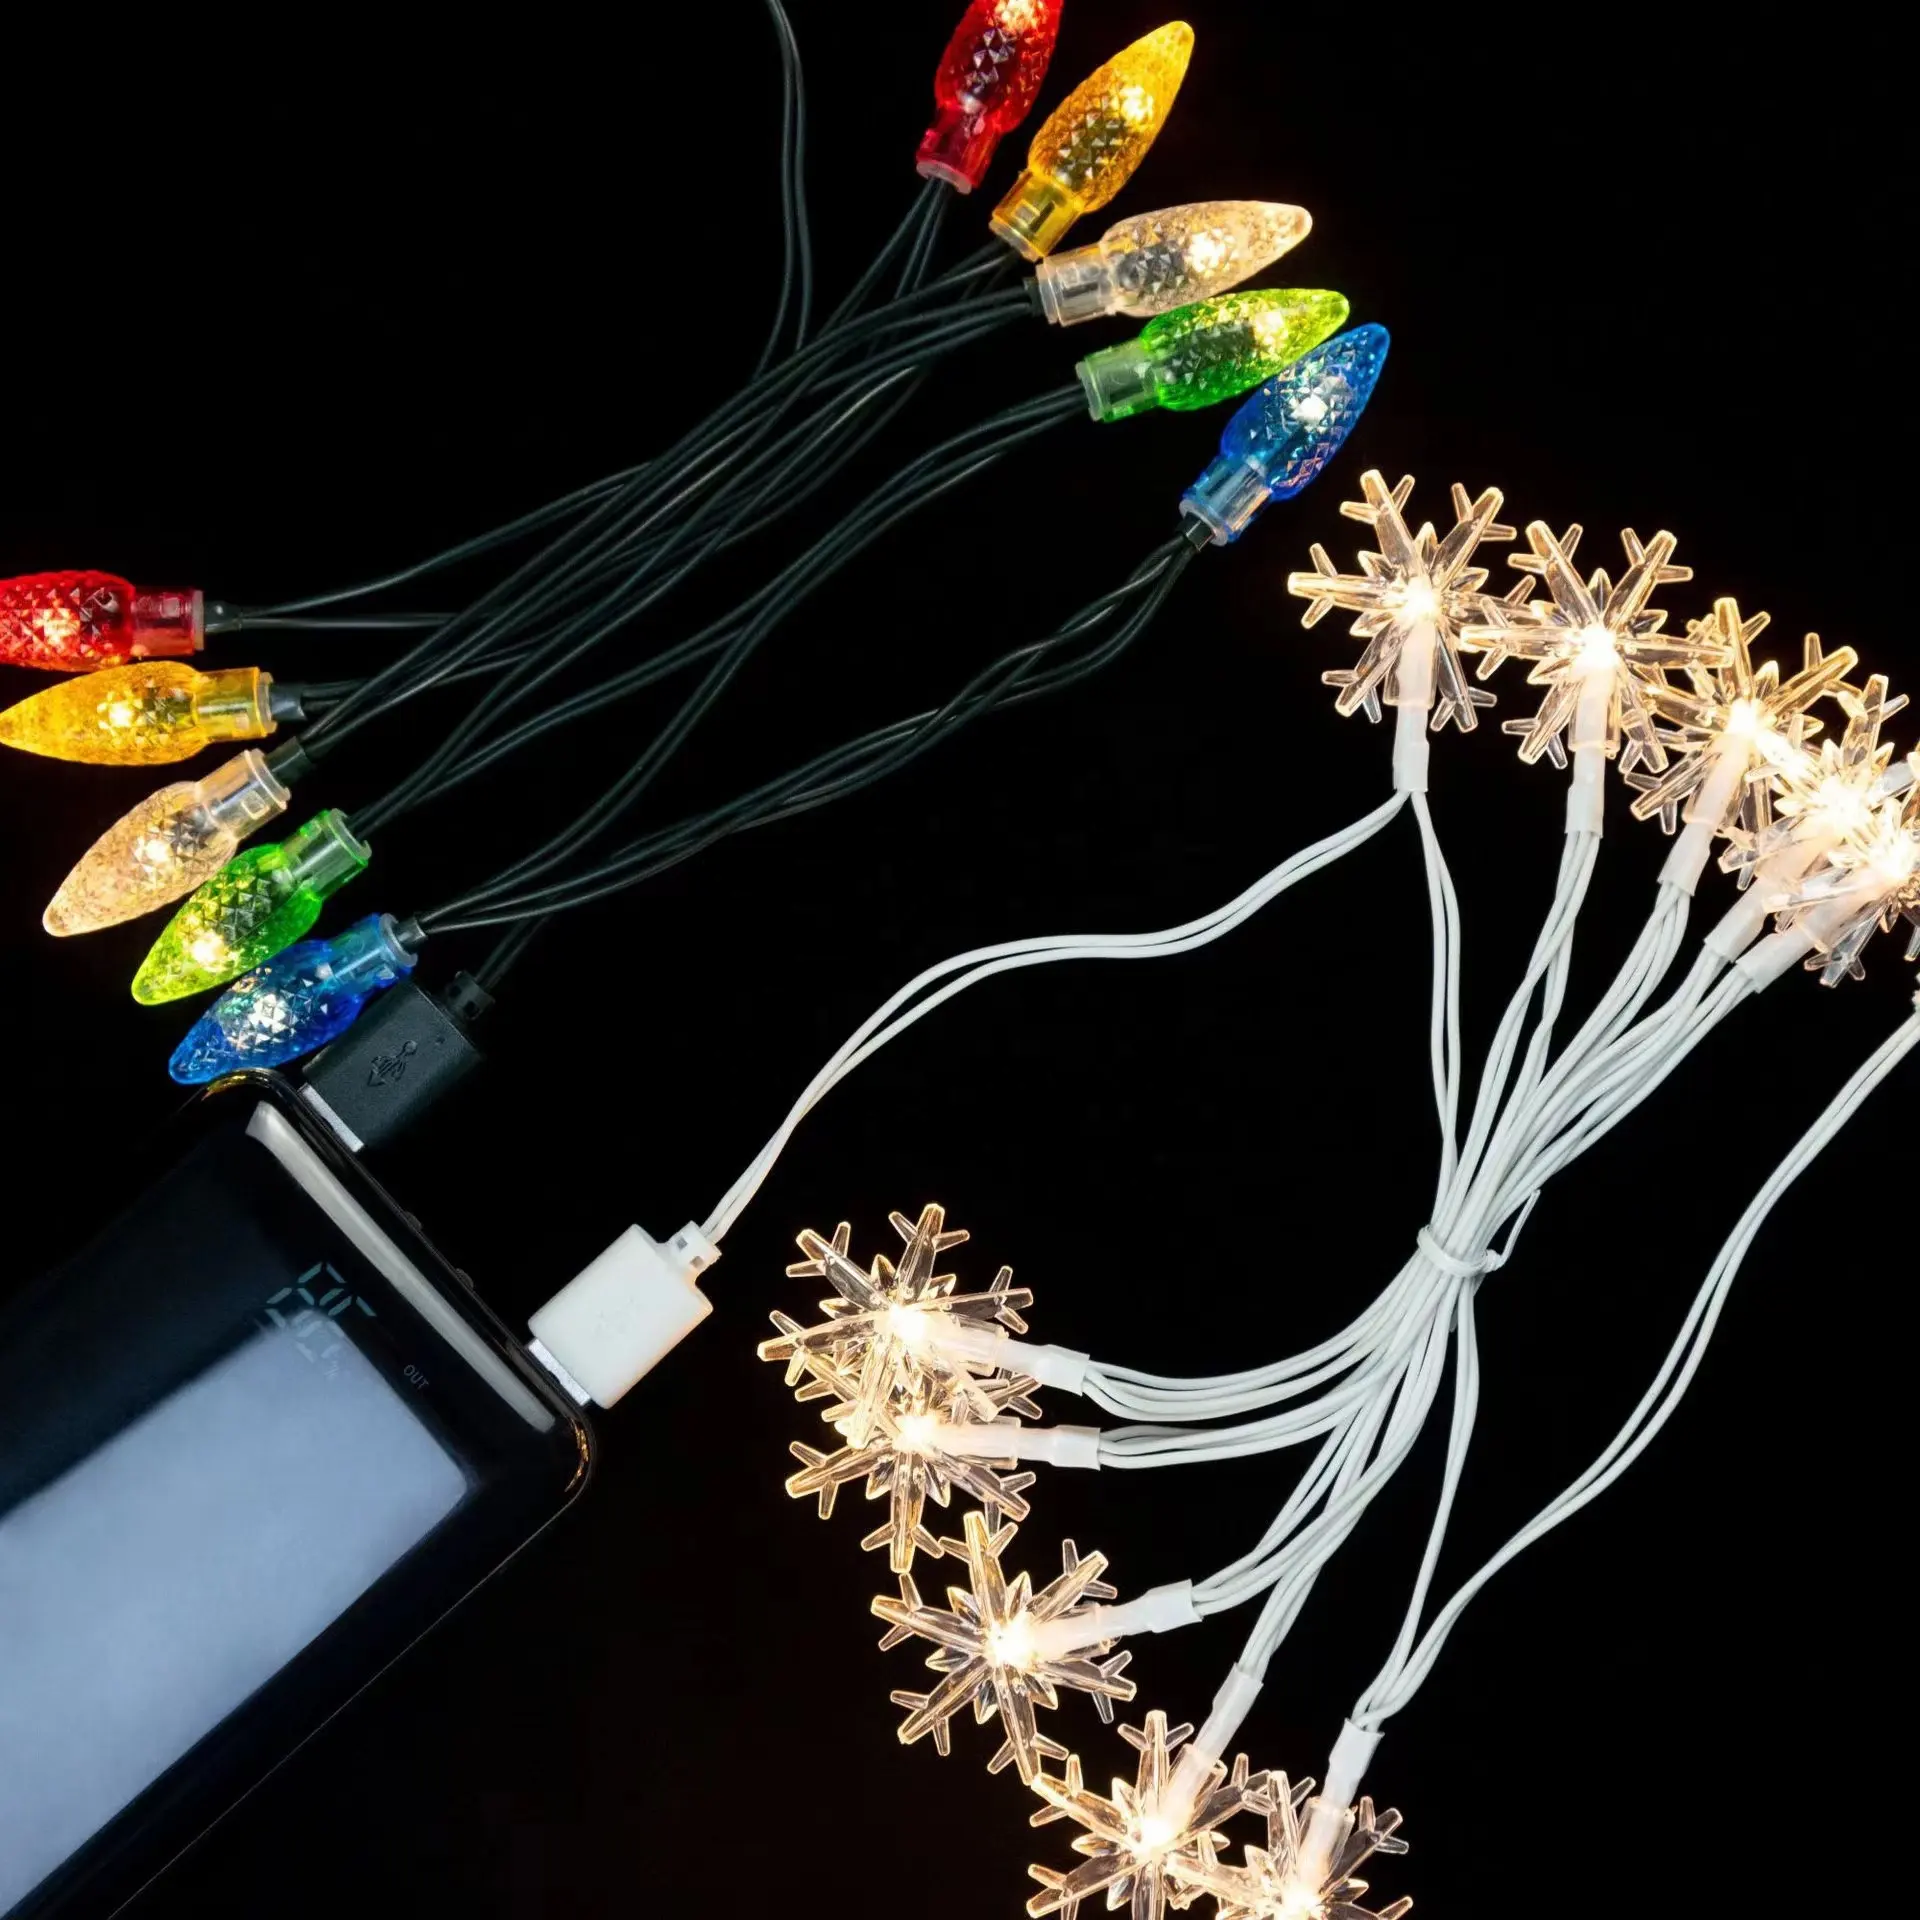 LED Strawberry Christmas light phone charger cable 5V USB powered 50 inch 10 LED multi-color bulb compatible with multiple ports